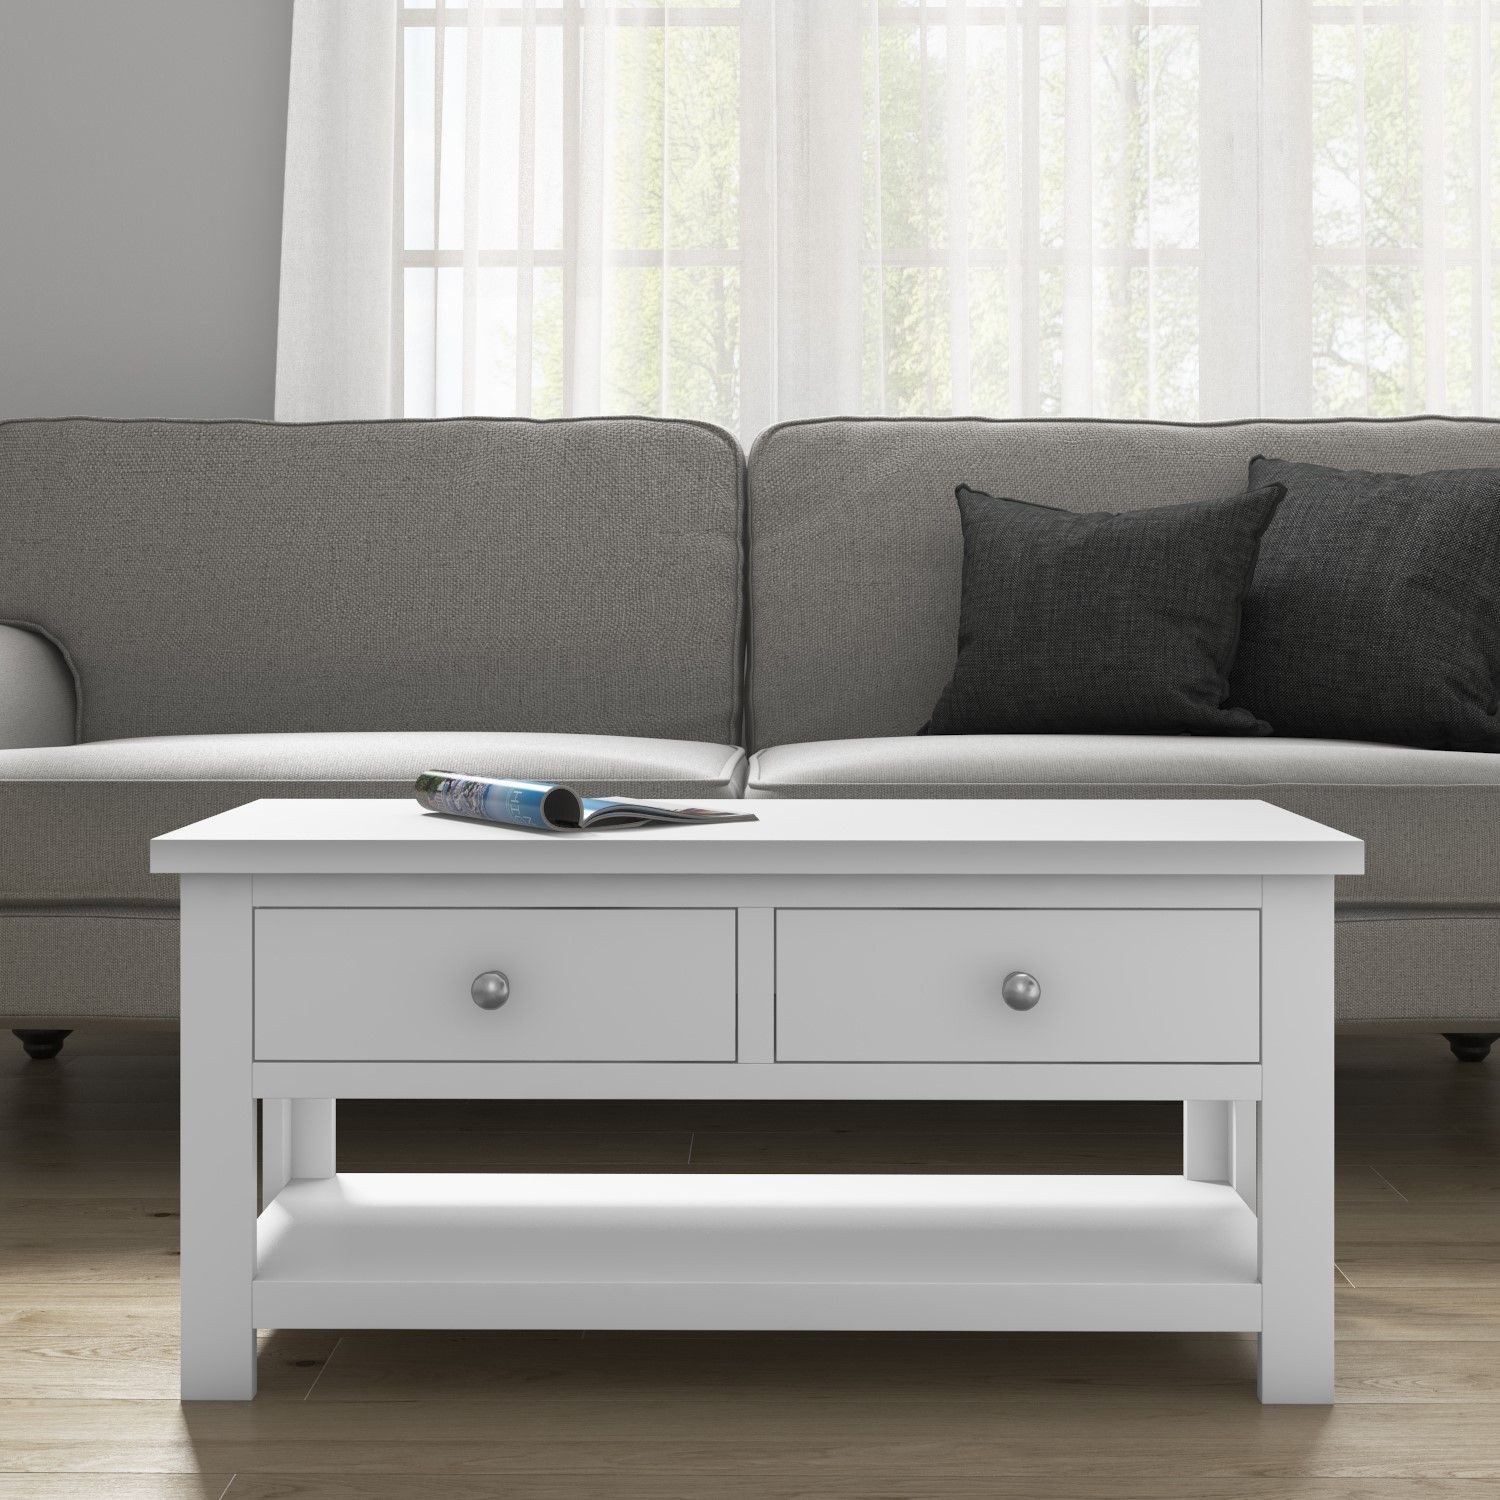 Small White Coffee Table With Storage / A Coffee Table With Storage Is Throughout Coffee Tables With Open Storage Shelves (View 19 of 20)